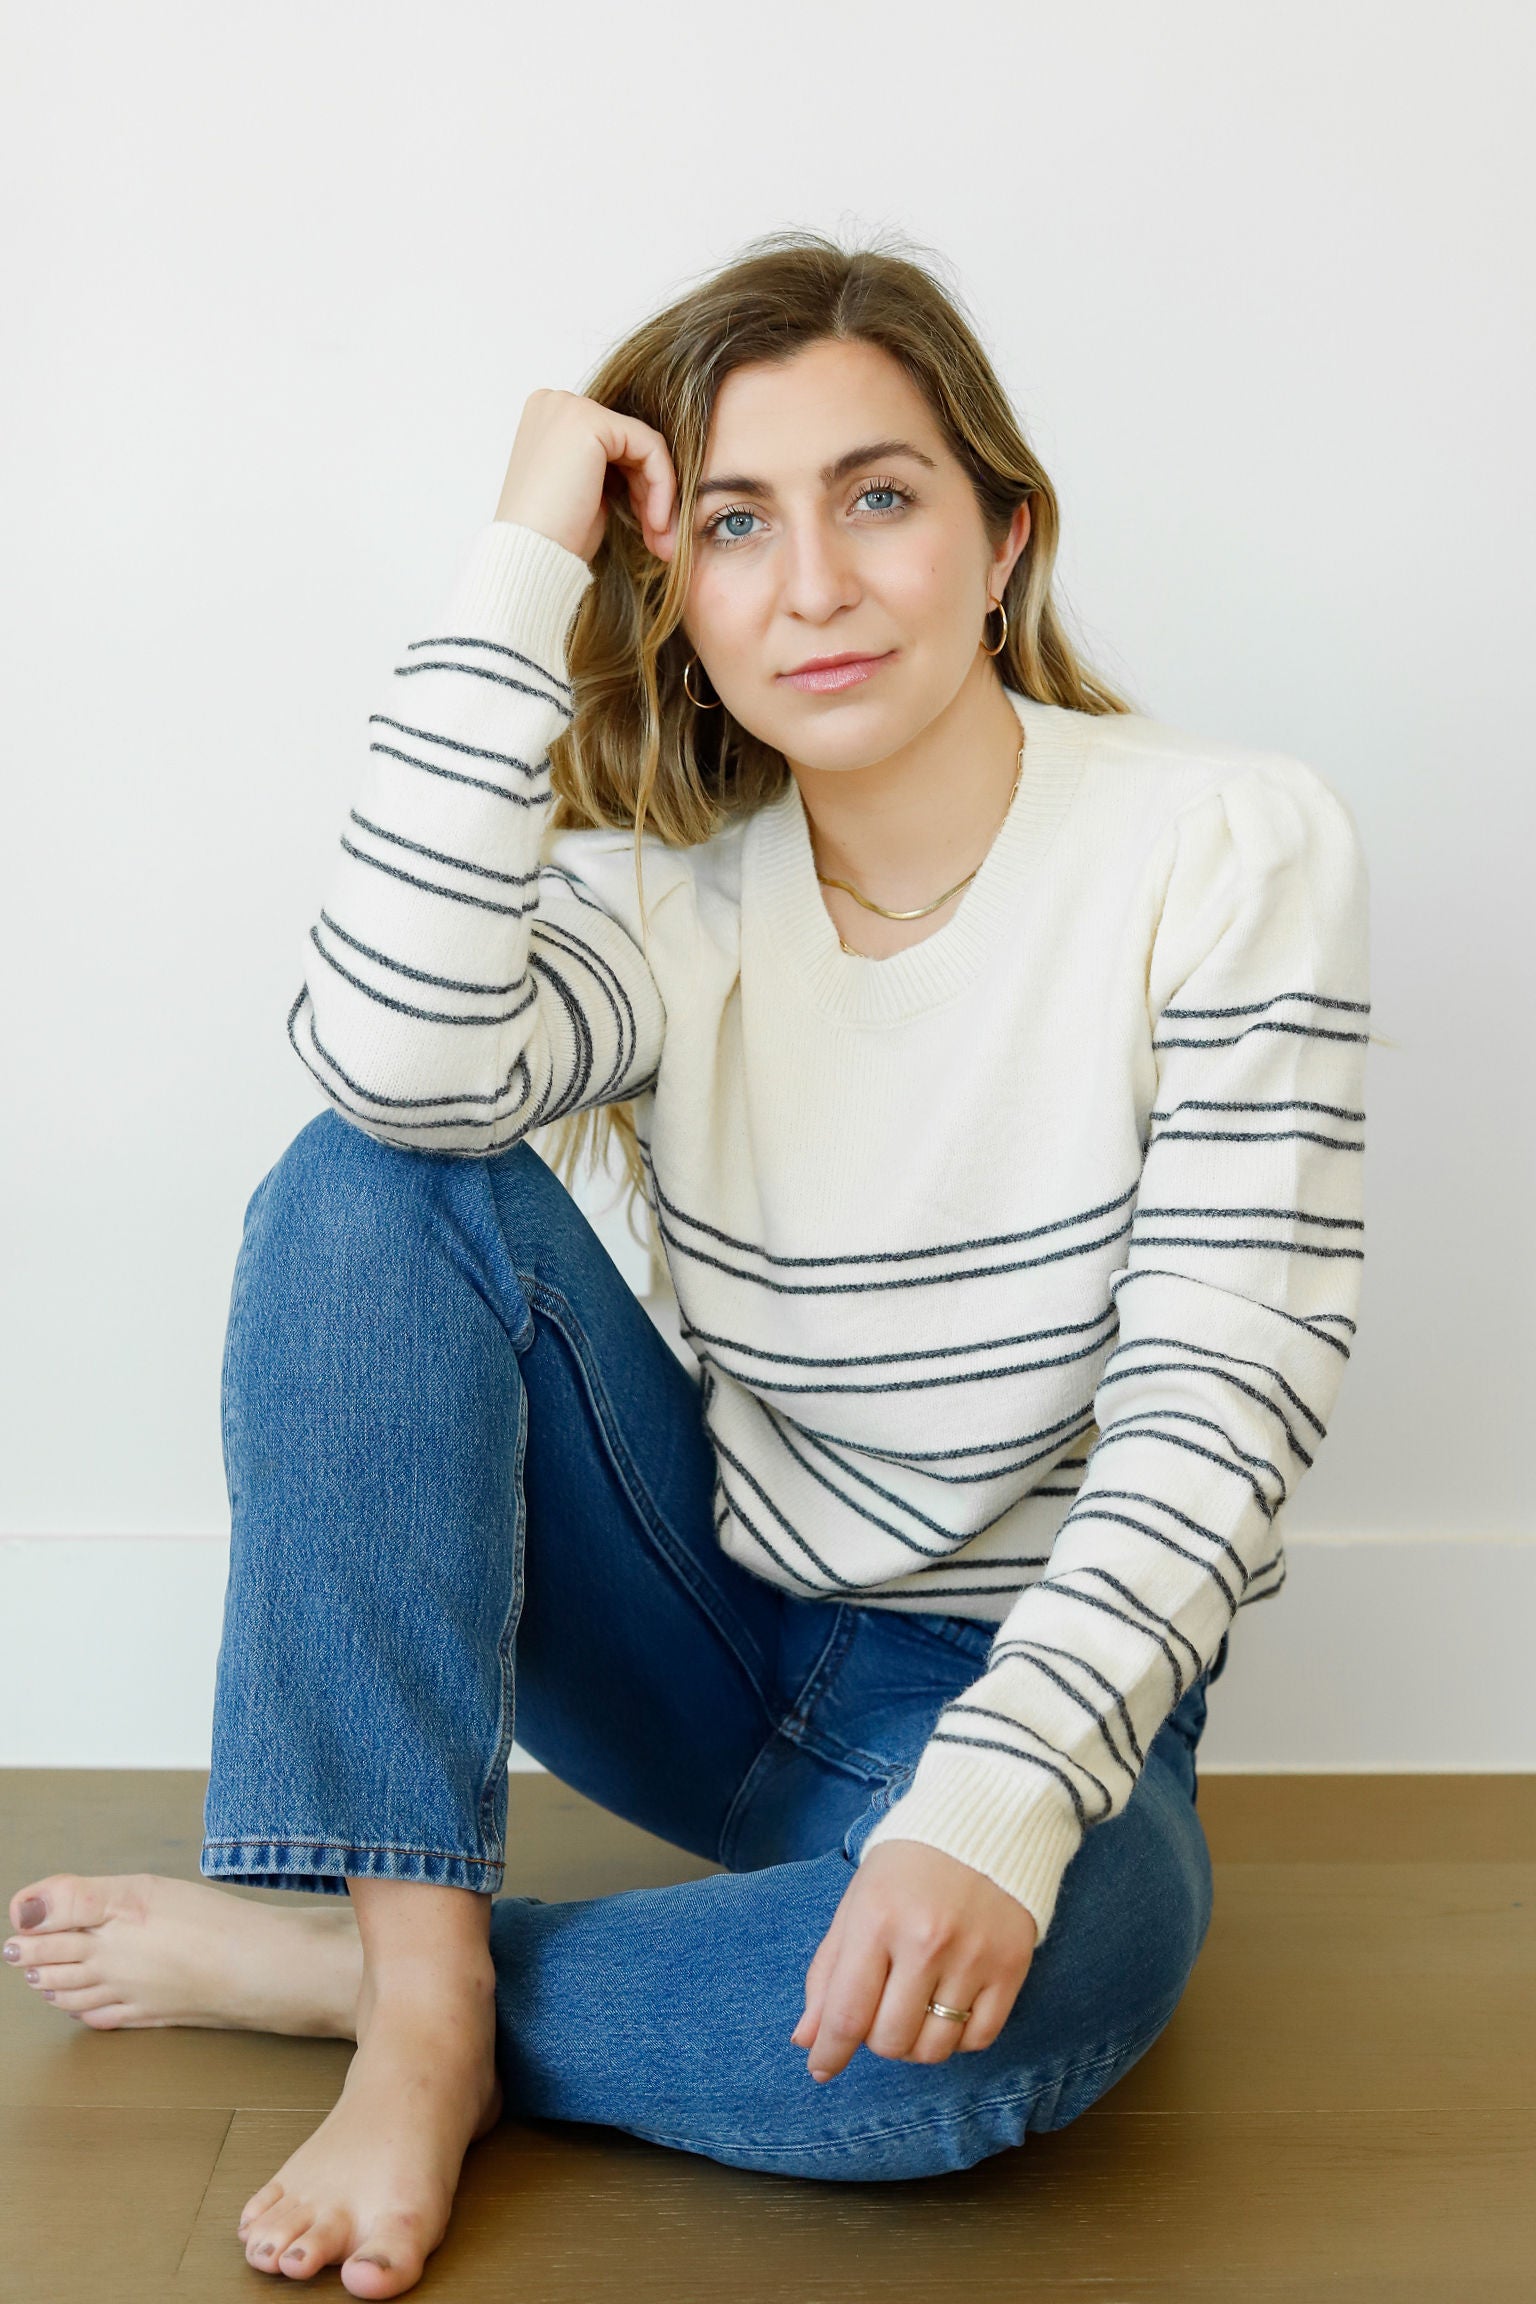 curate, laura laval paris, paisian womens apparel brand, sustainable and ethically made womens apparel and fashion, beige and navy blue striped sweater, striped sweater, womens striped sweater, high quality, made in france, womens sweaters, sweater weather